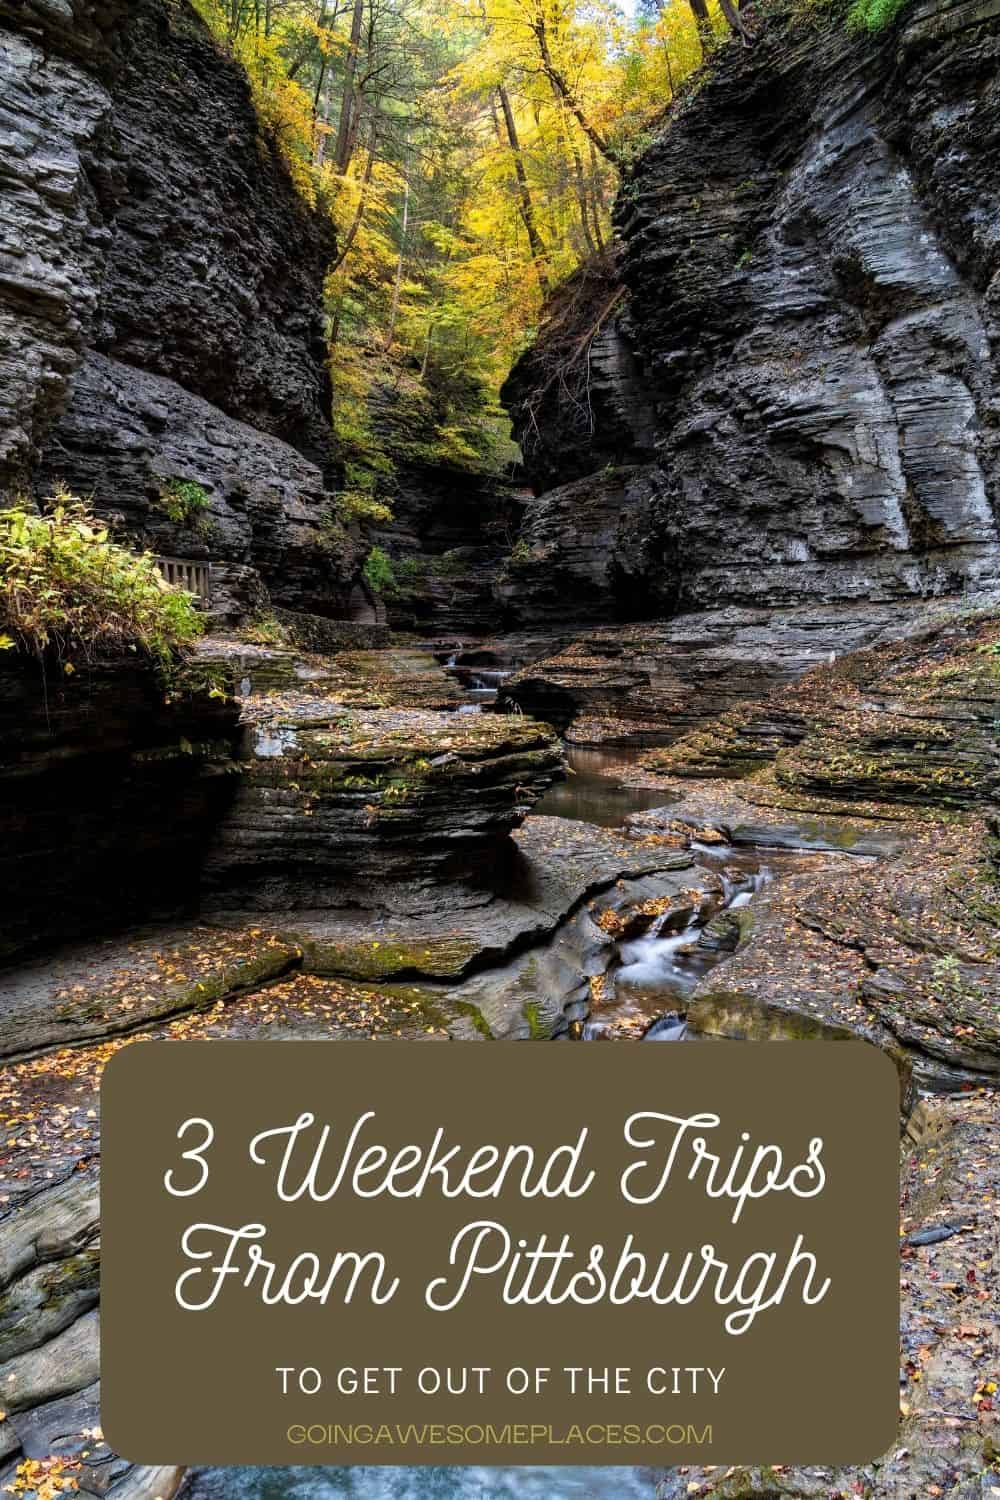 3 Weekend Trips from Pittsburgh to Get Out of the City